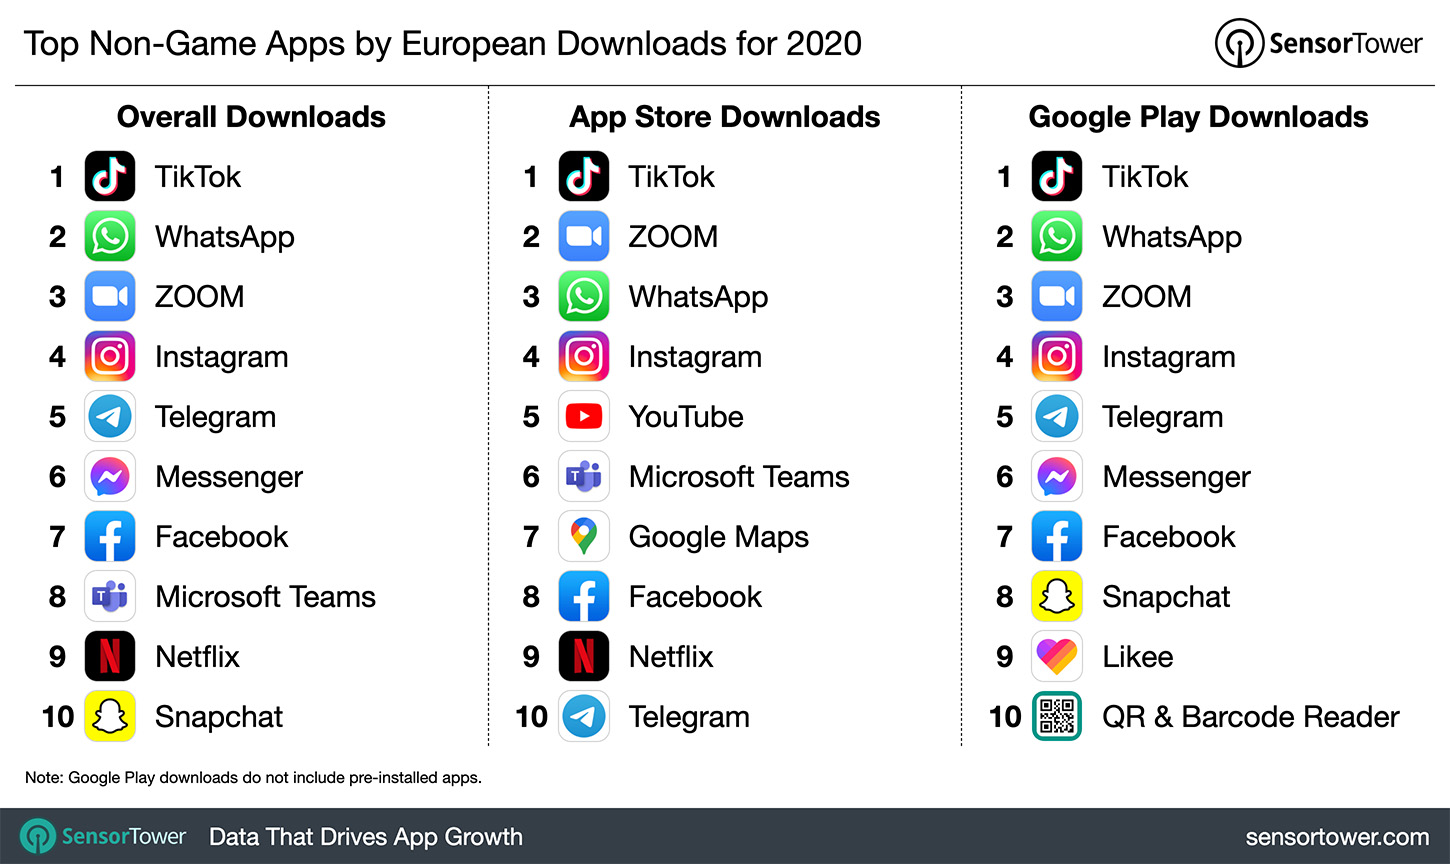 Top Non-Game Apps by European Downloads for 2020